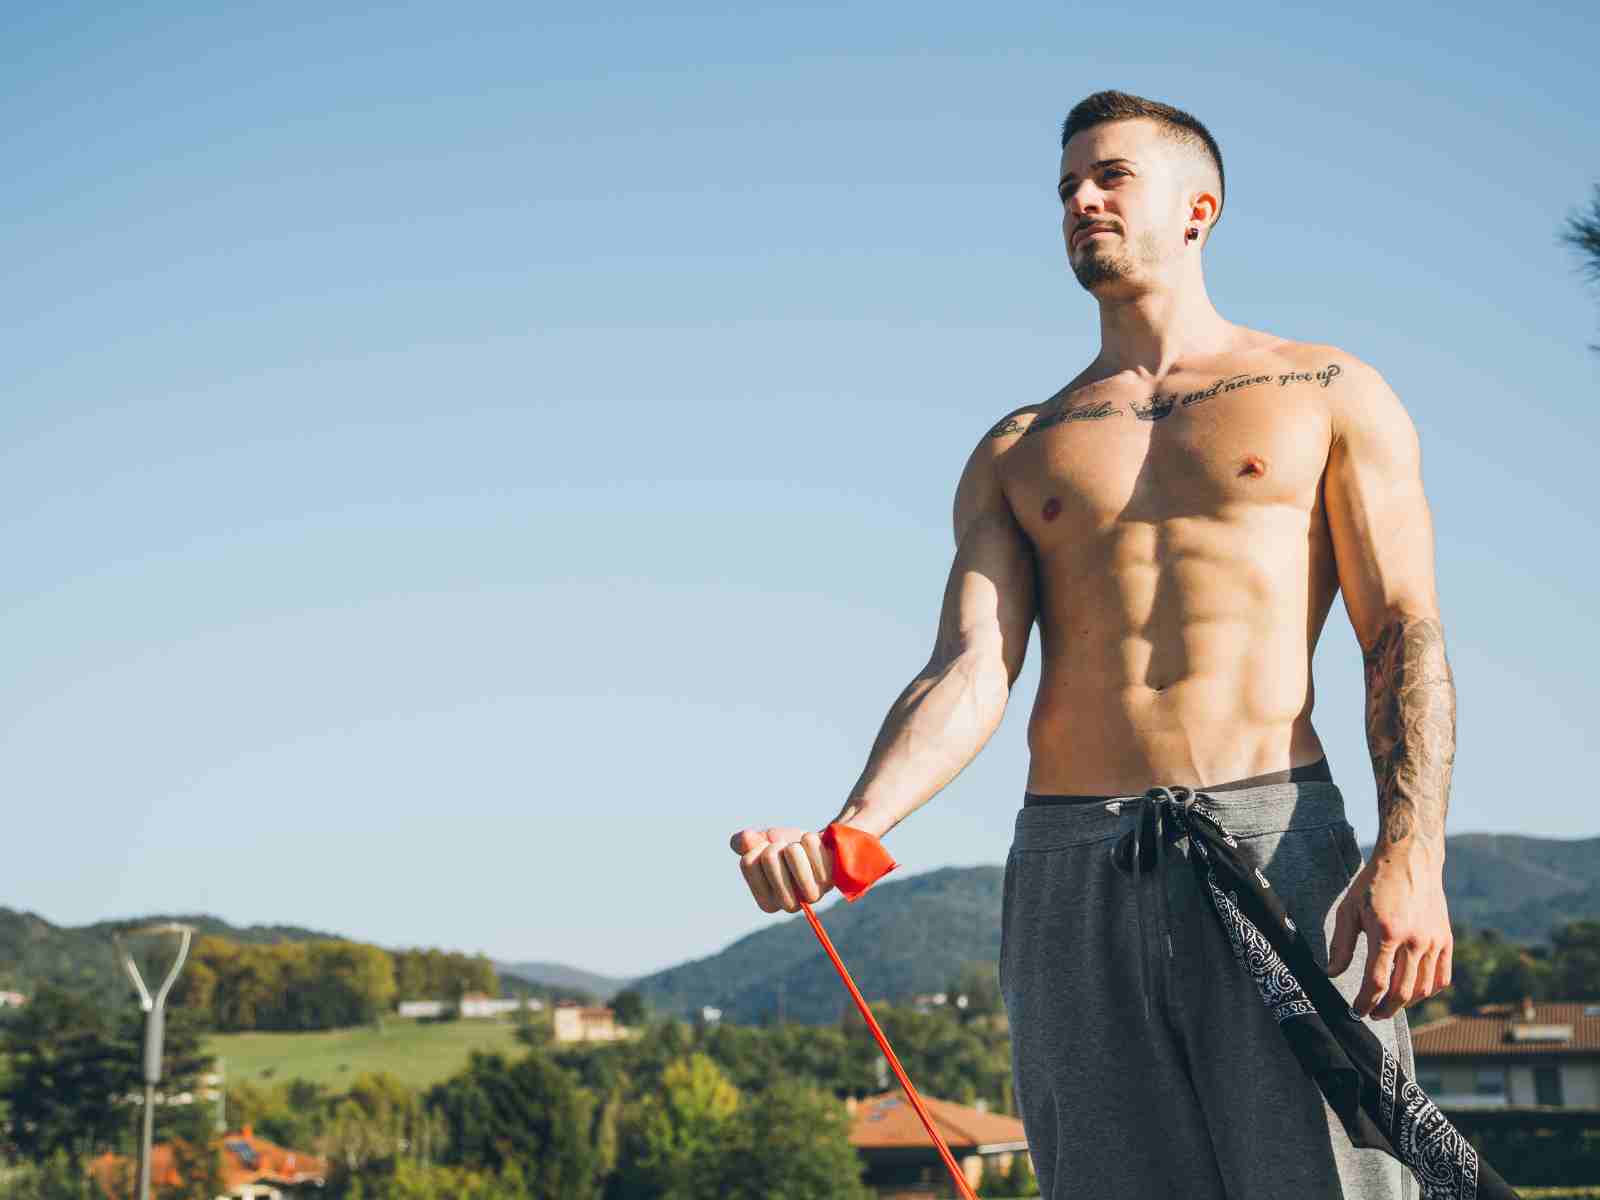 resistance bands are a useful investment for calisthenics workouts